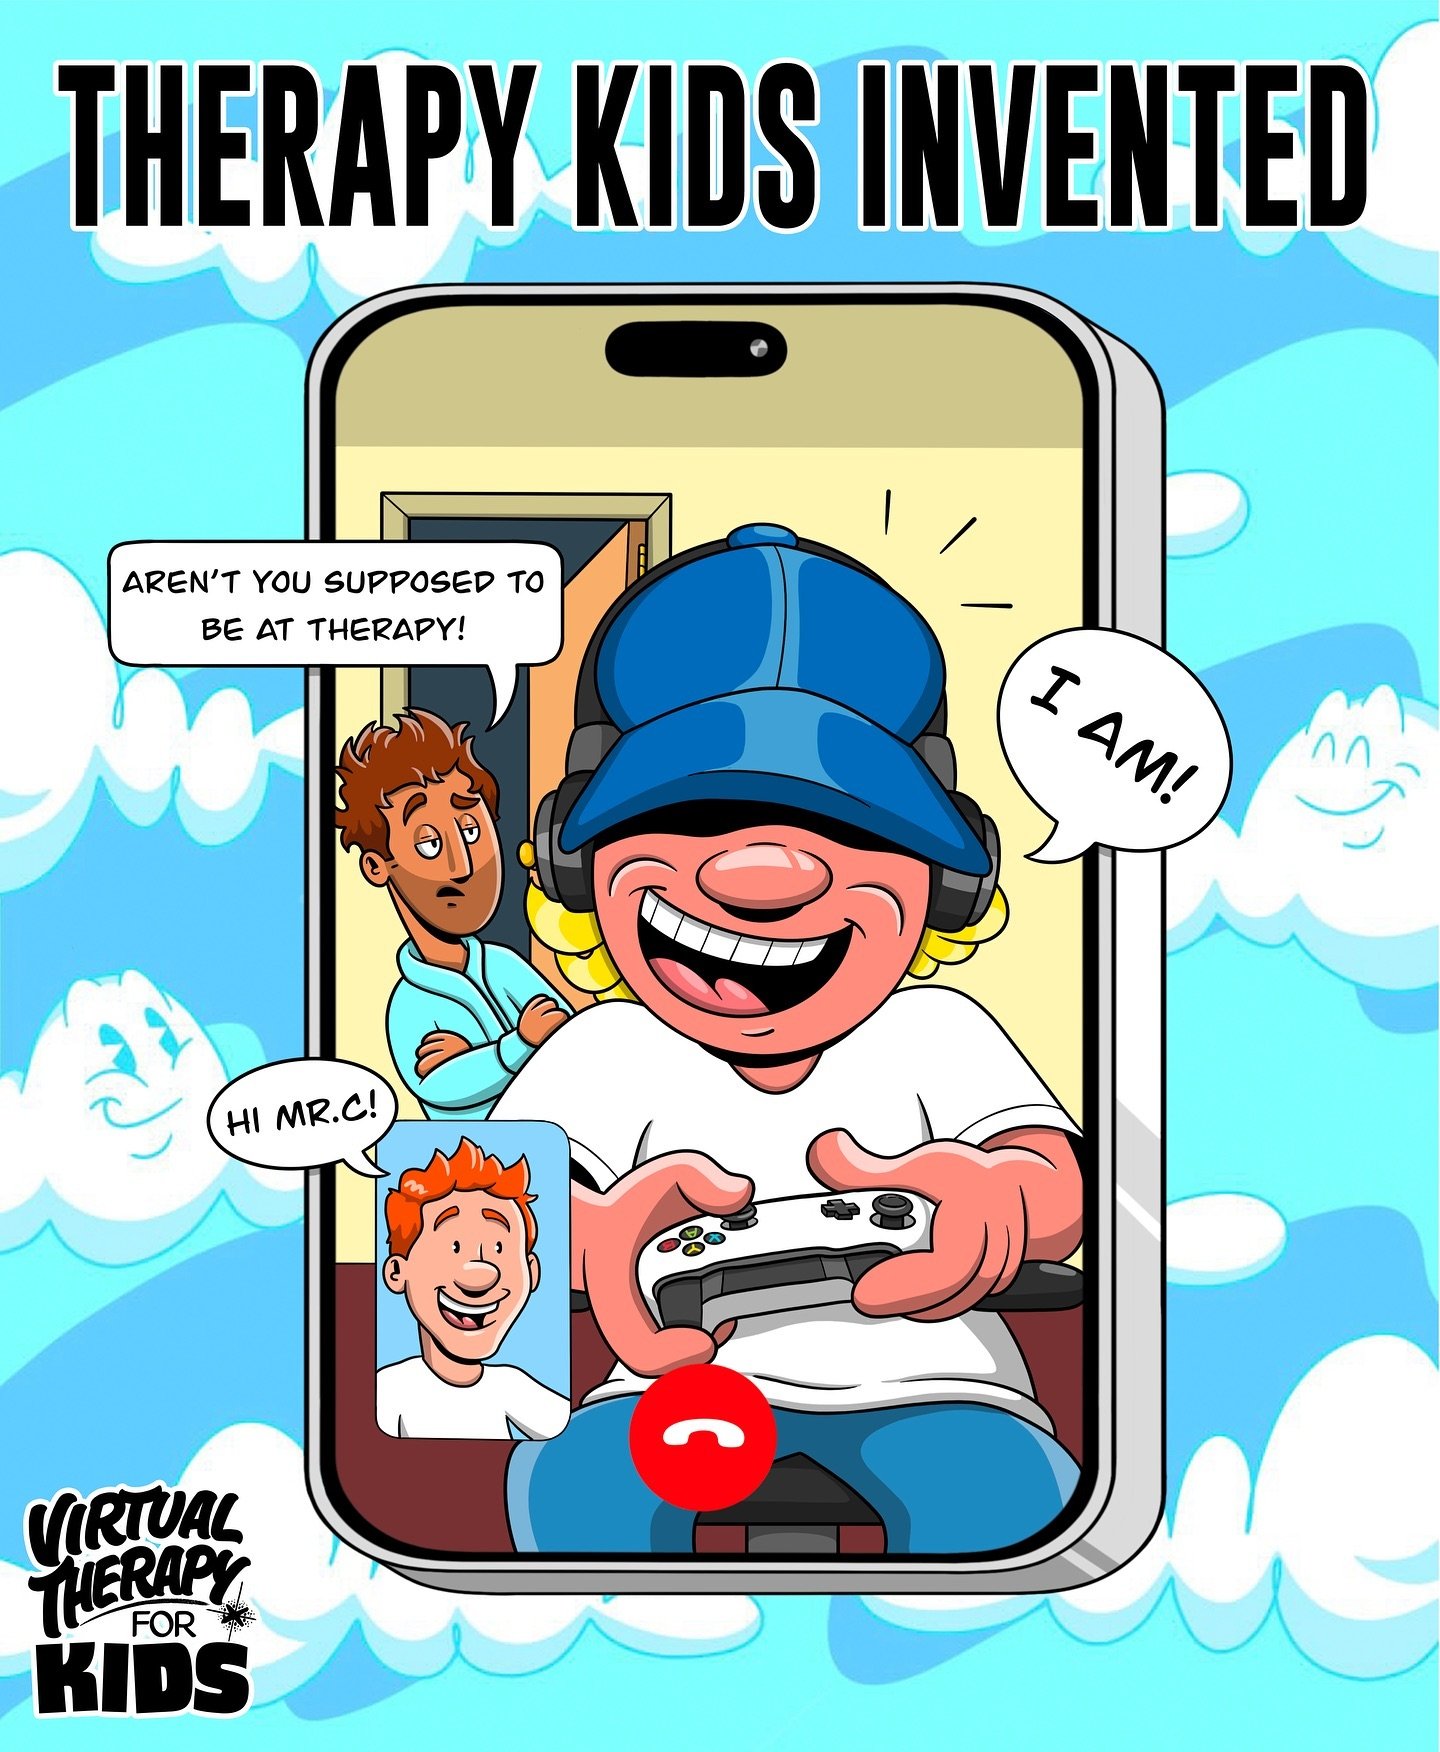 Therapy kids invented! ADHD, autism, anxiety, OCD, depression, school concerns and more. Learn more at virtualtherapyforkids.com